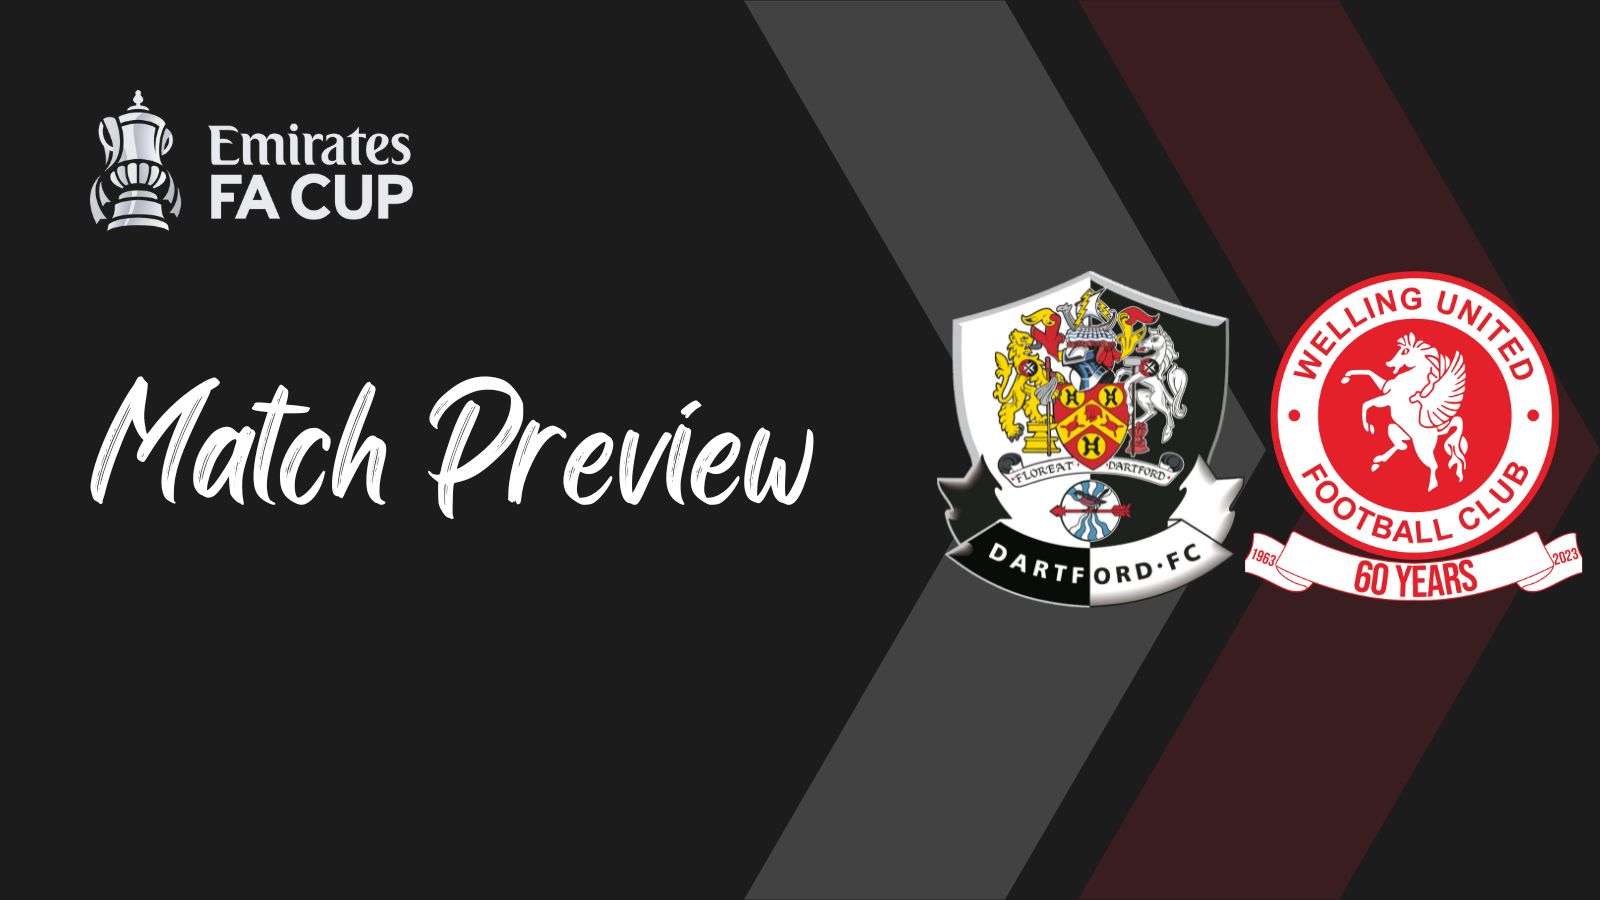 Match Preview DFC WELLING